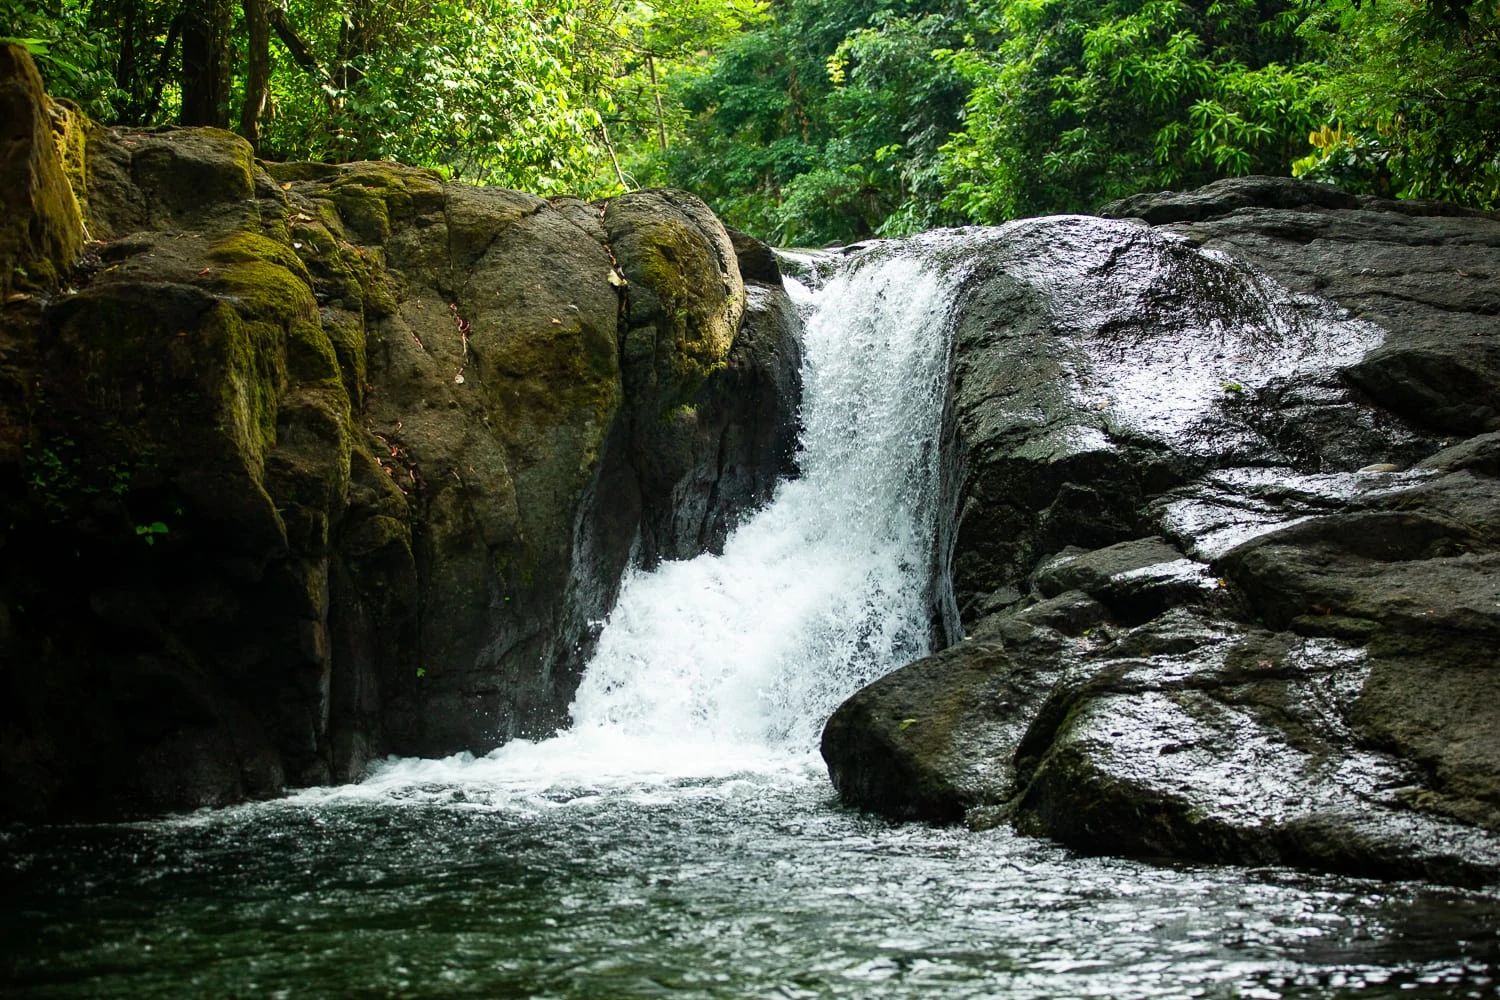 A short but powerfull waterfall rushes over a jungle riverbed in Manuel Antonio, Costa Rica.